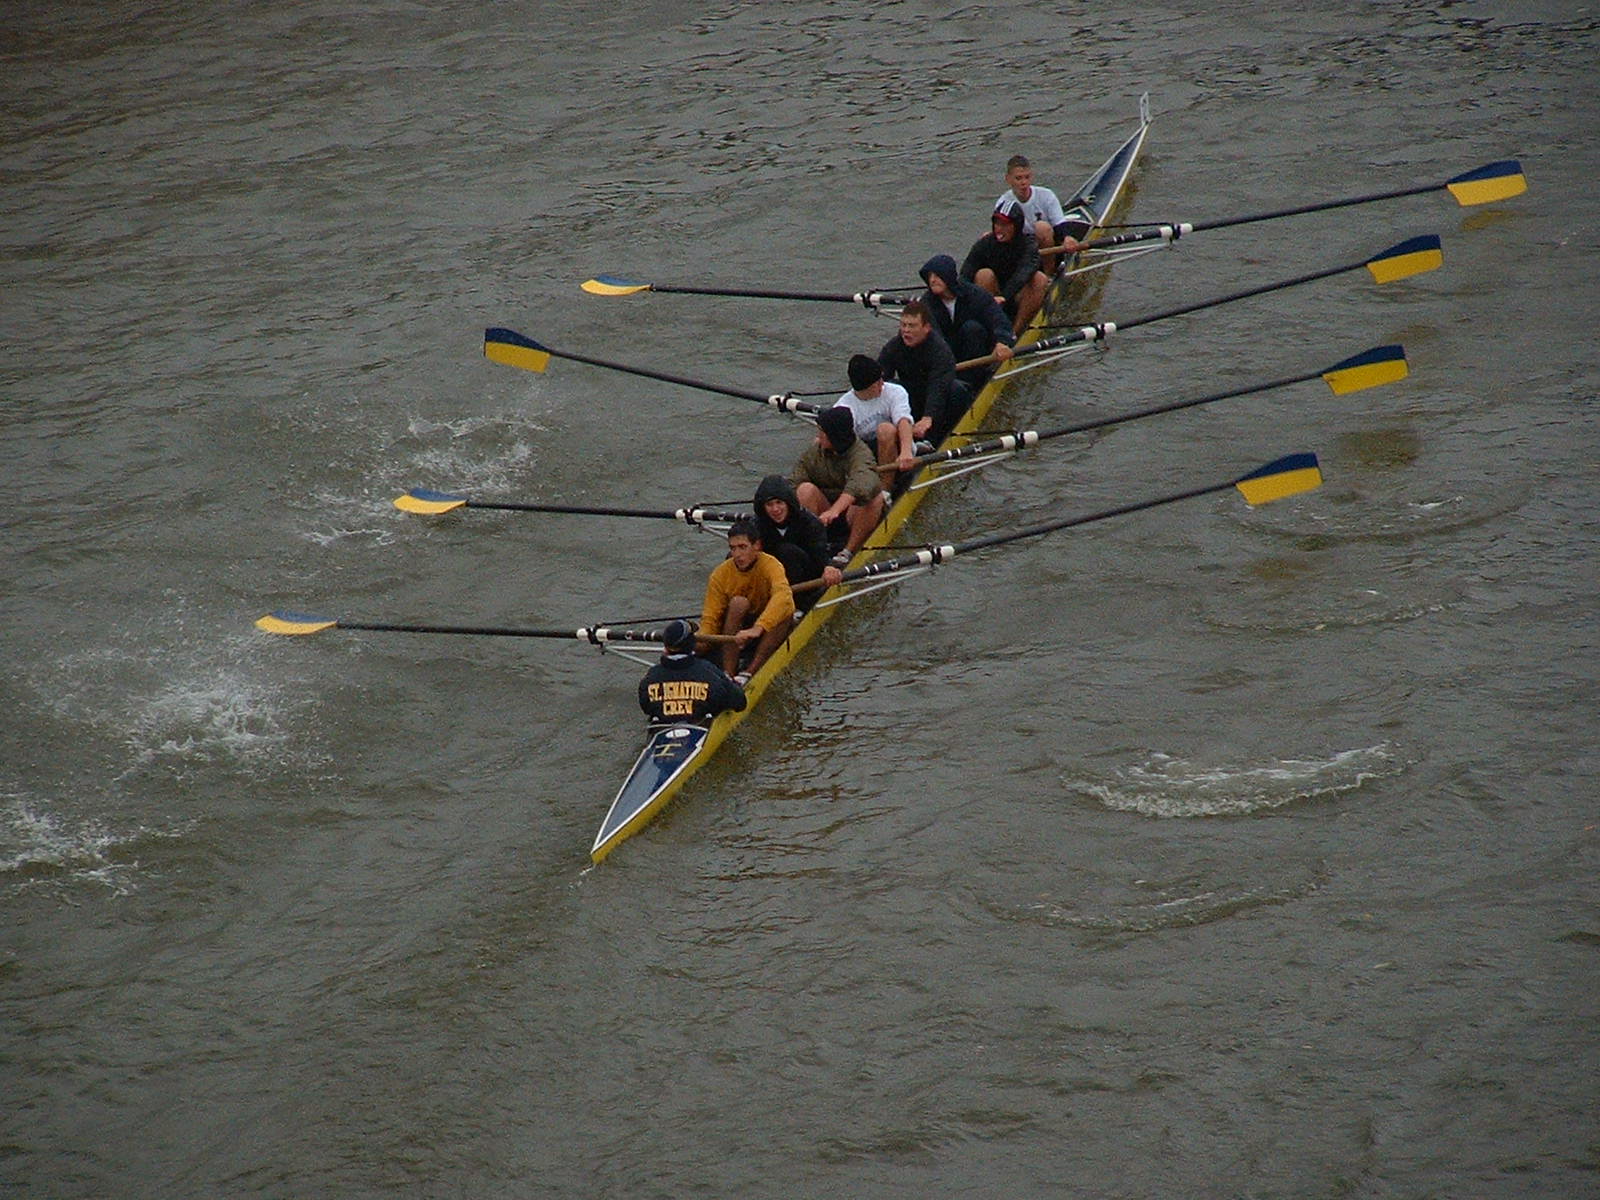 2003 Fall Head of the Ohio: Description Not Avail